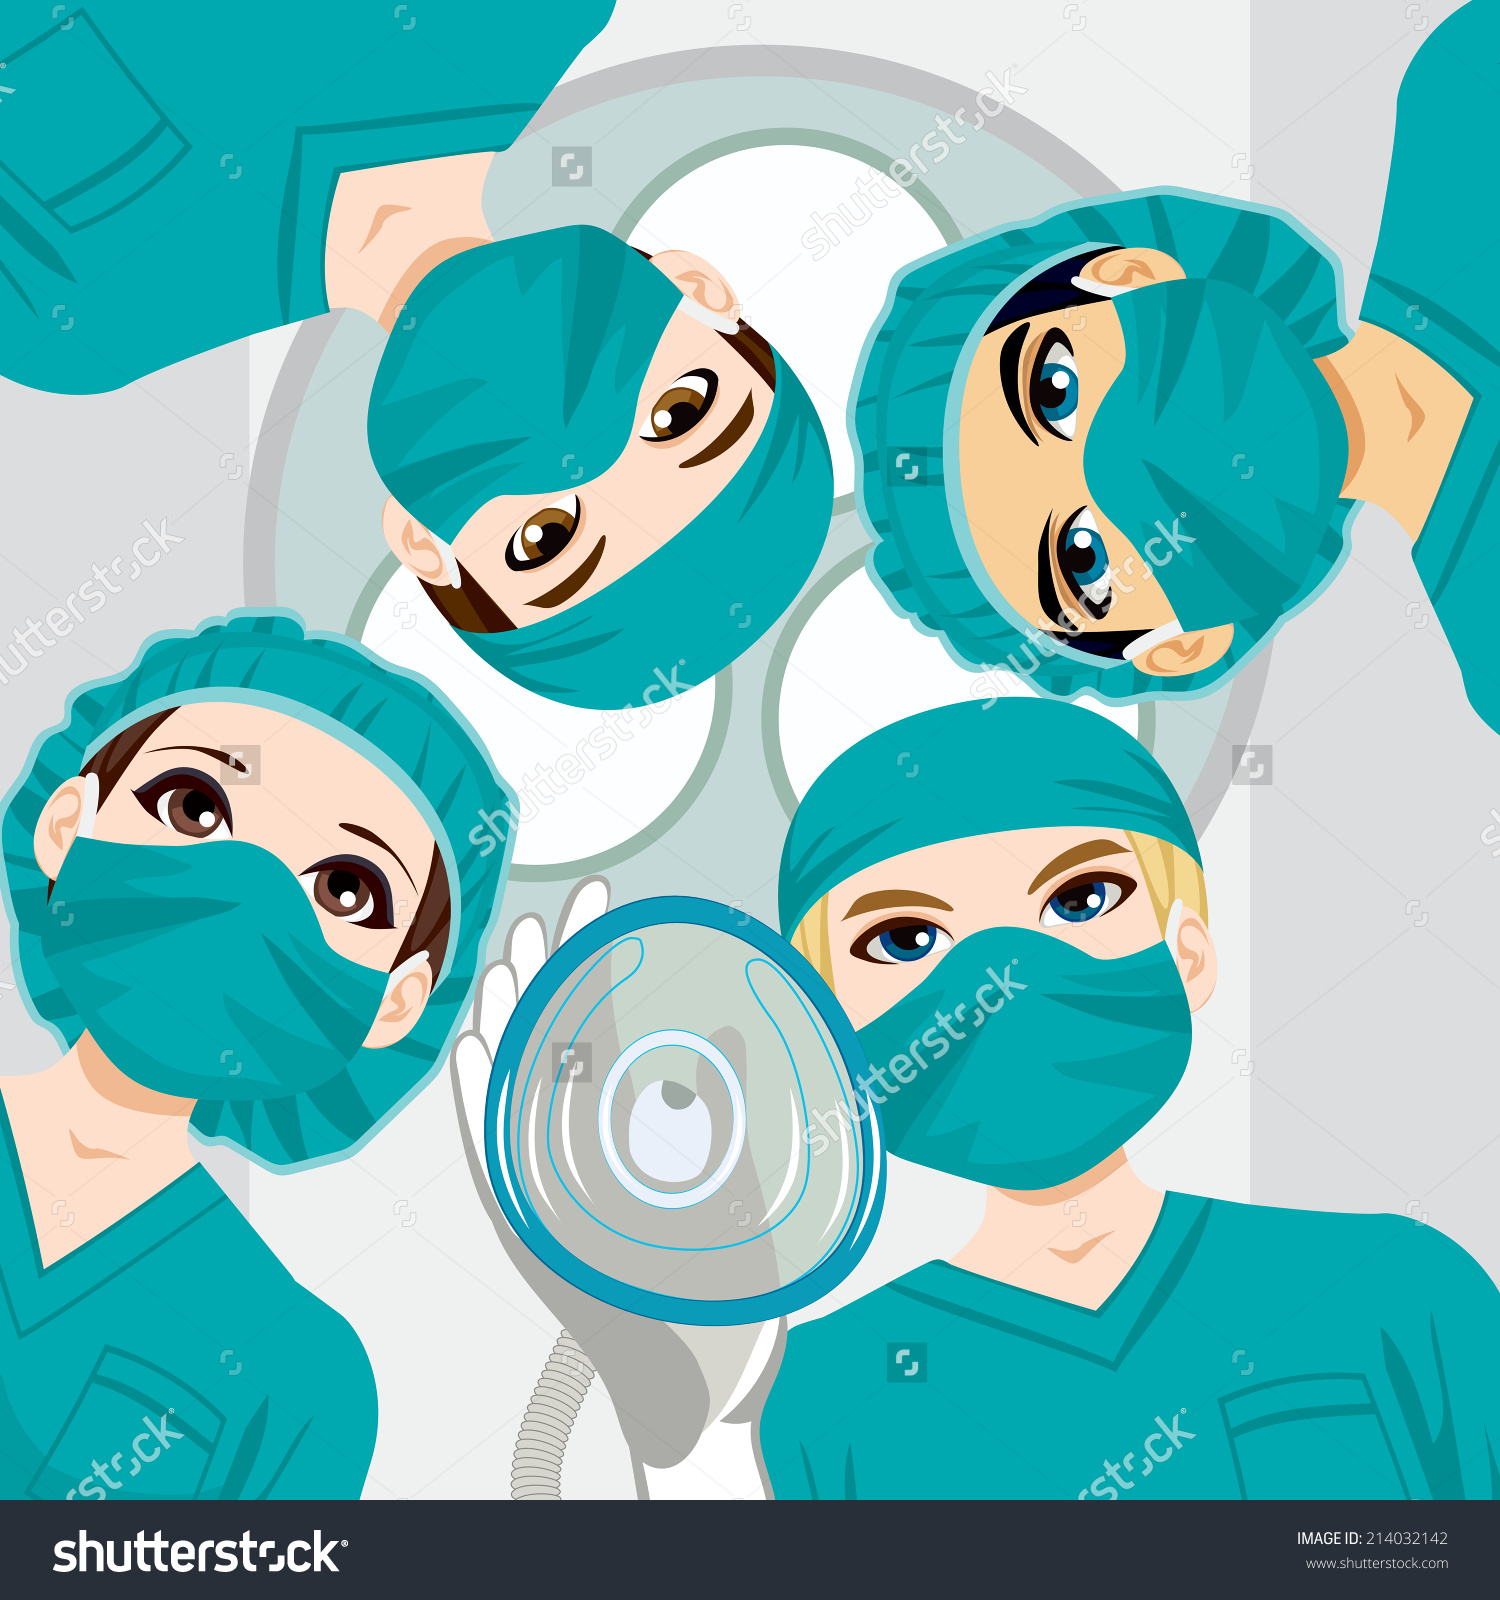 operating room clipart - photo #1